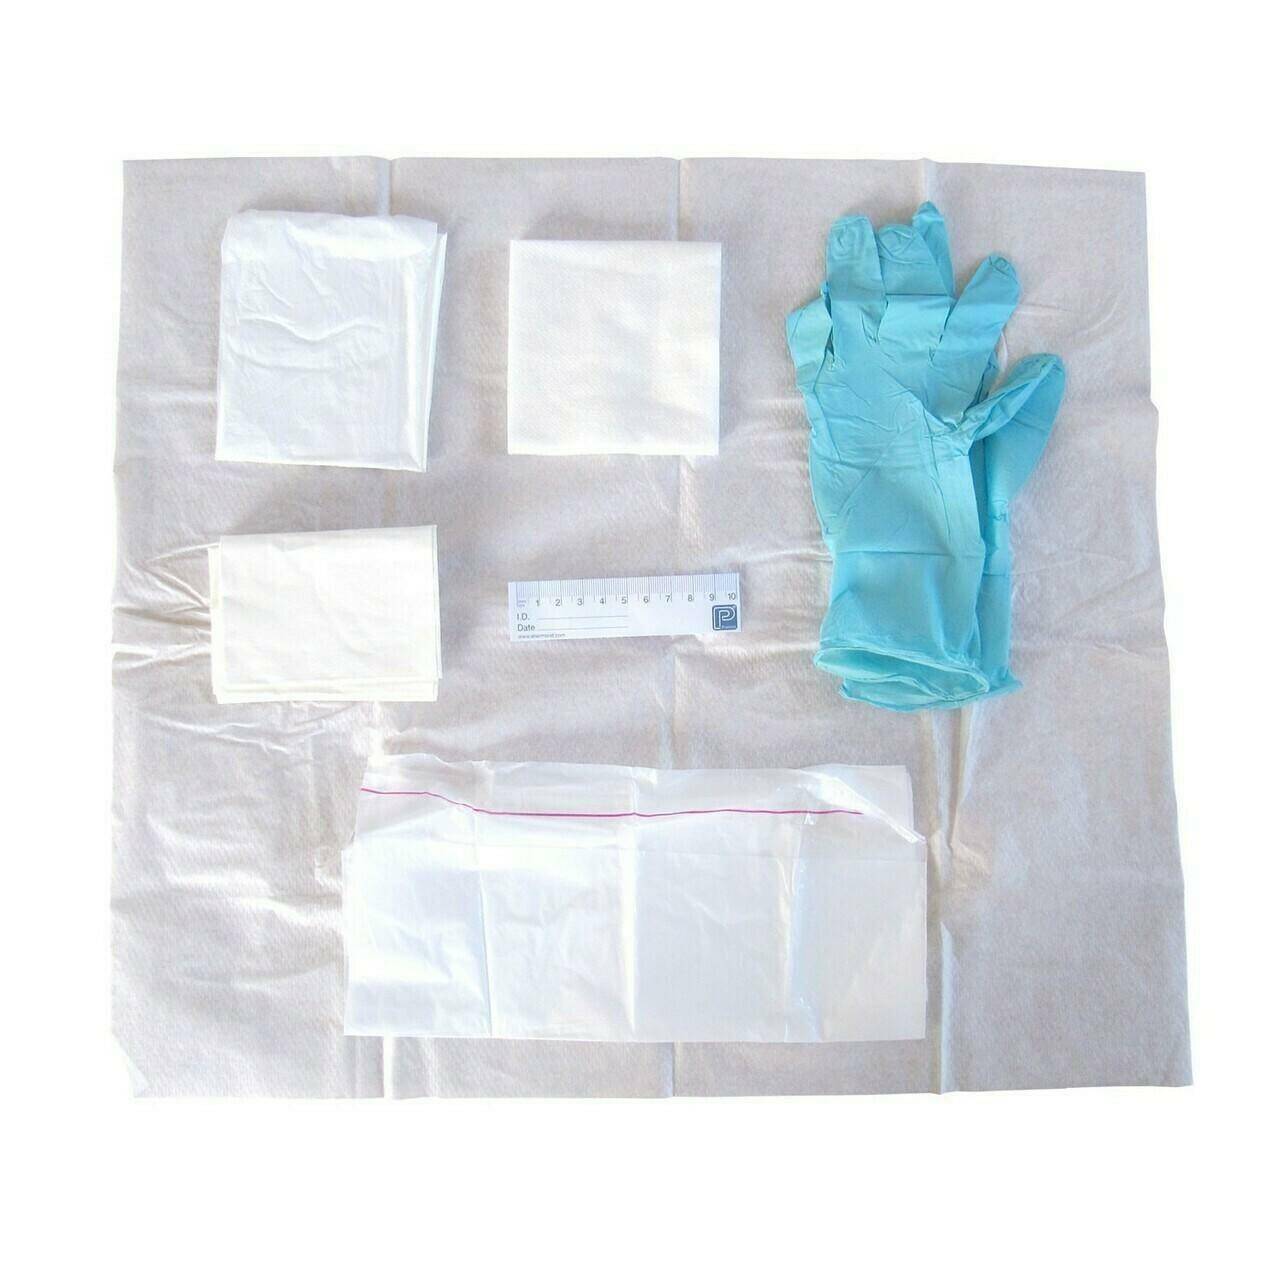 Polyfield Patient Pack with Nitrile Gloves